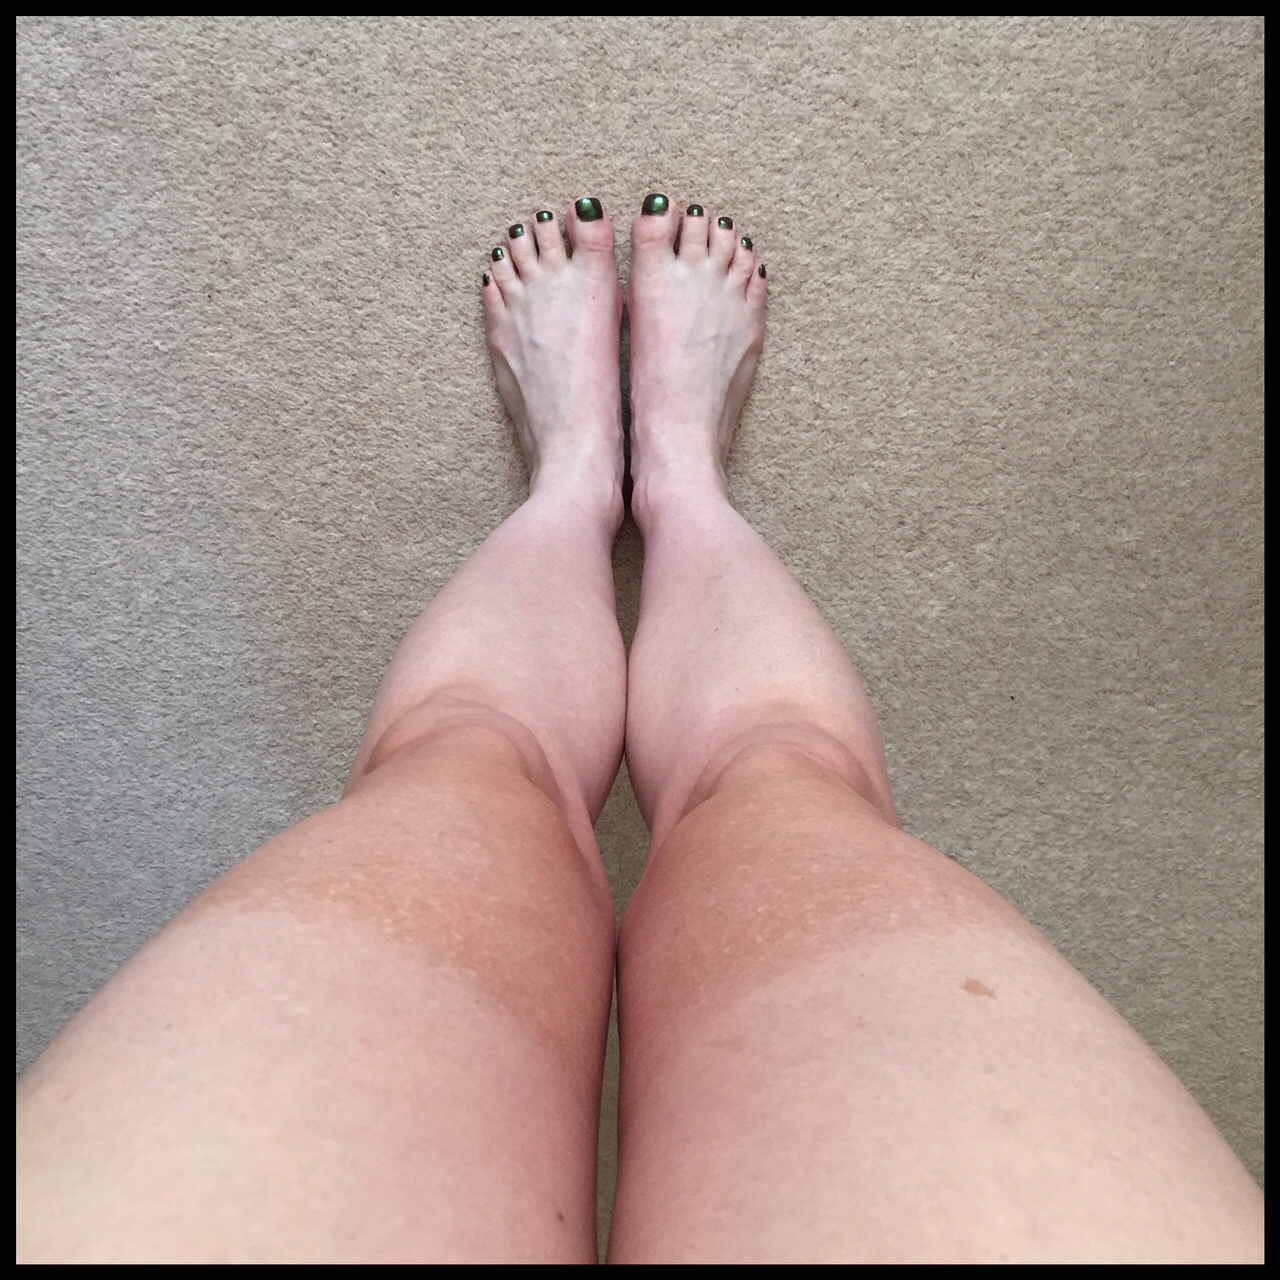 image - legs with tanned knees